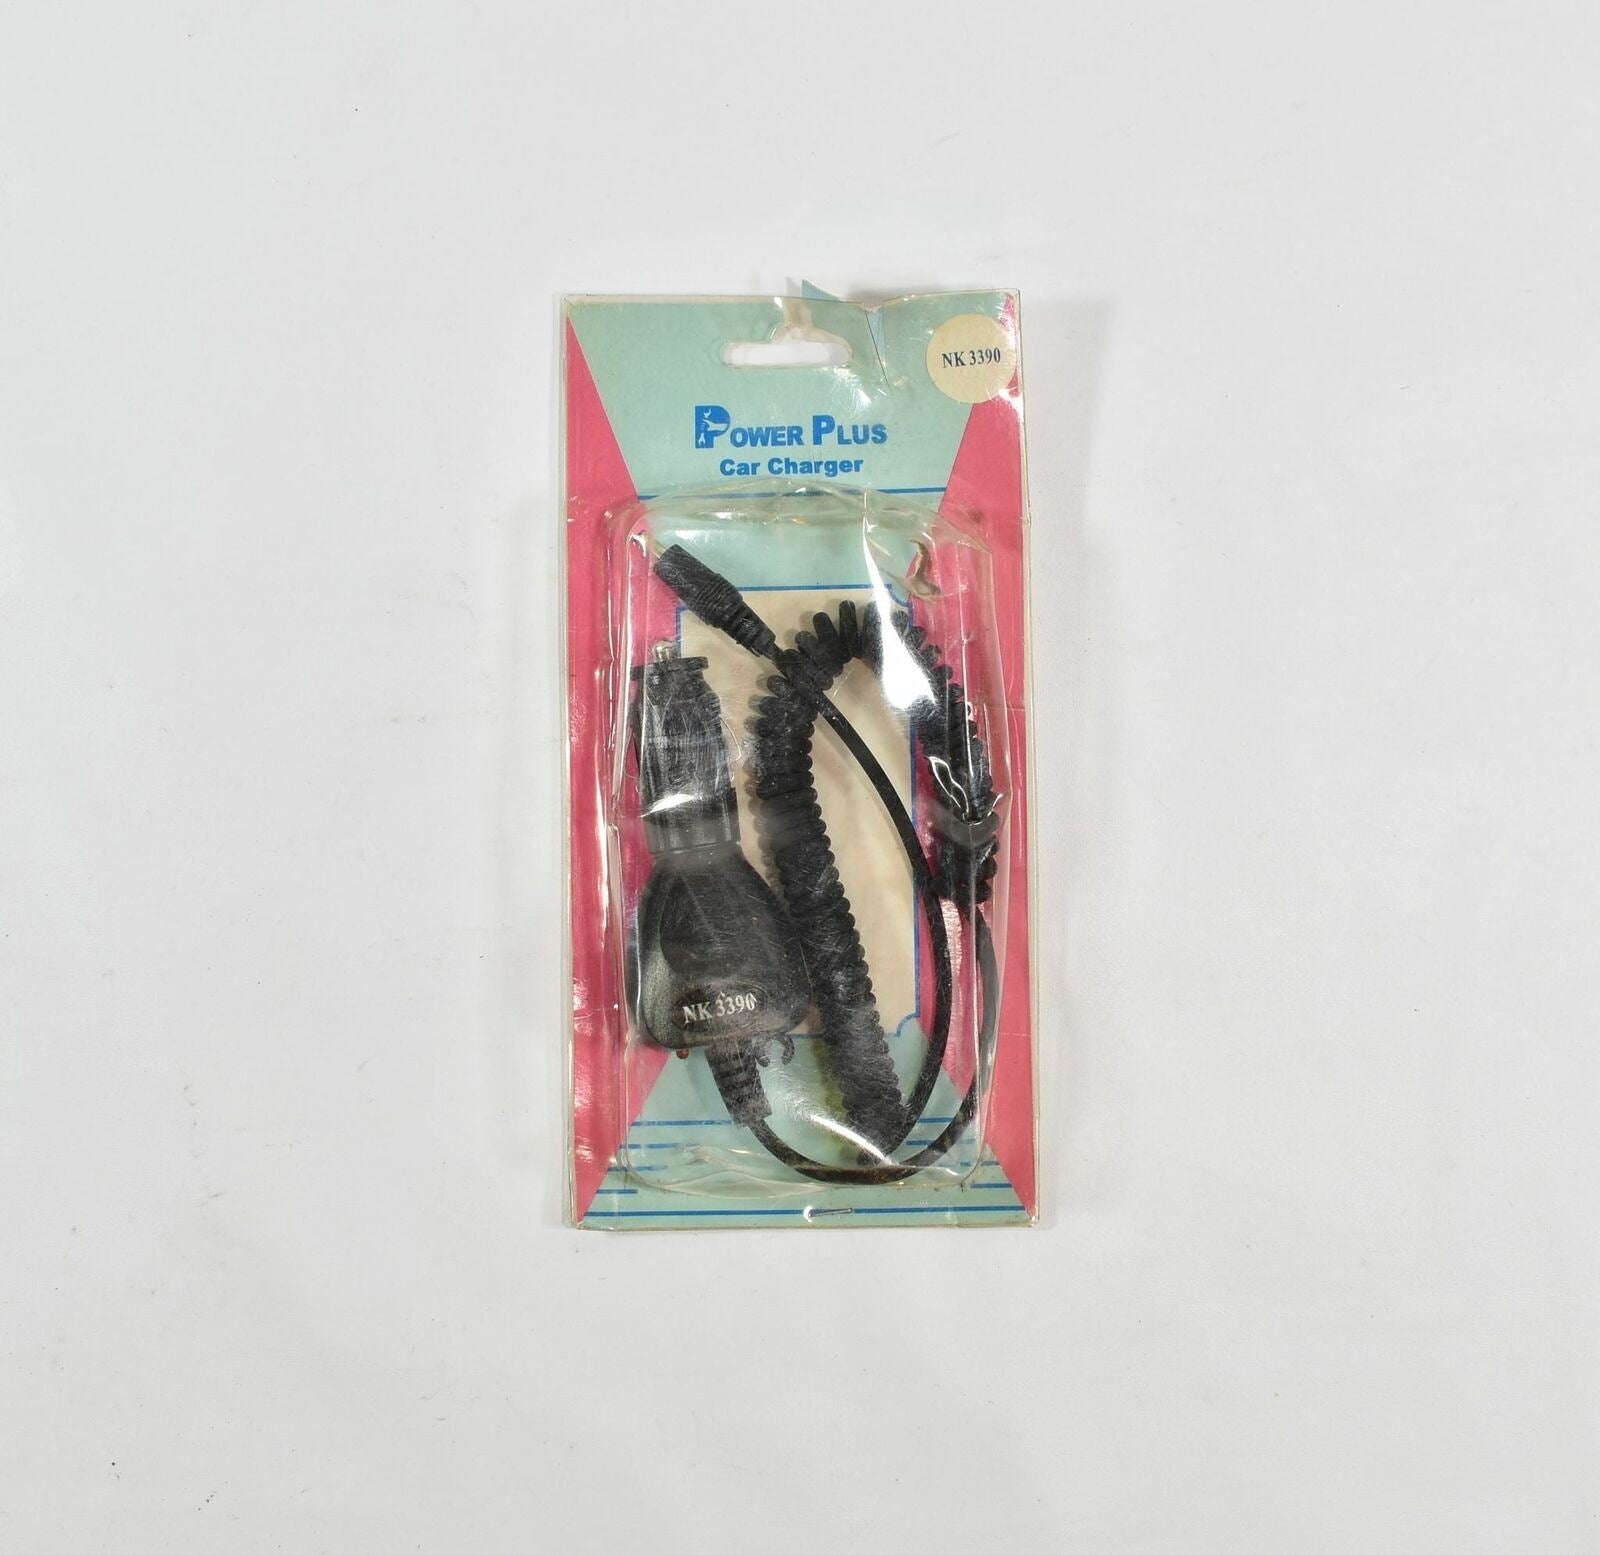 Nokia 3390 Cell phone charger Car Charger NK 3390 Unused